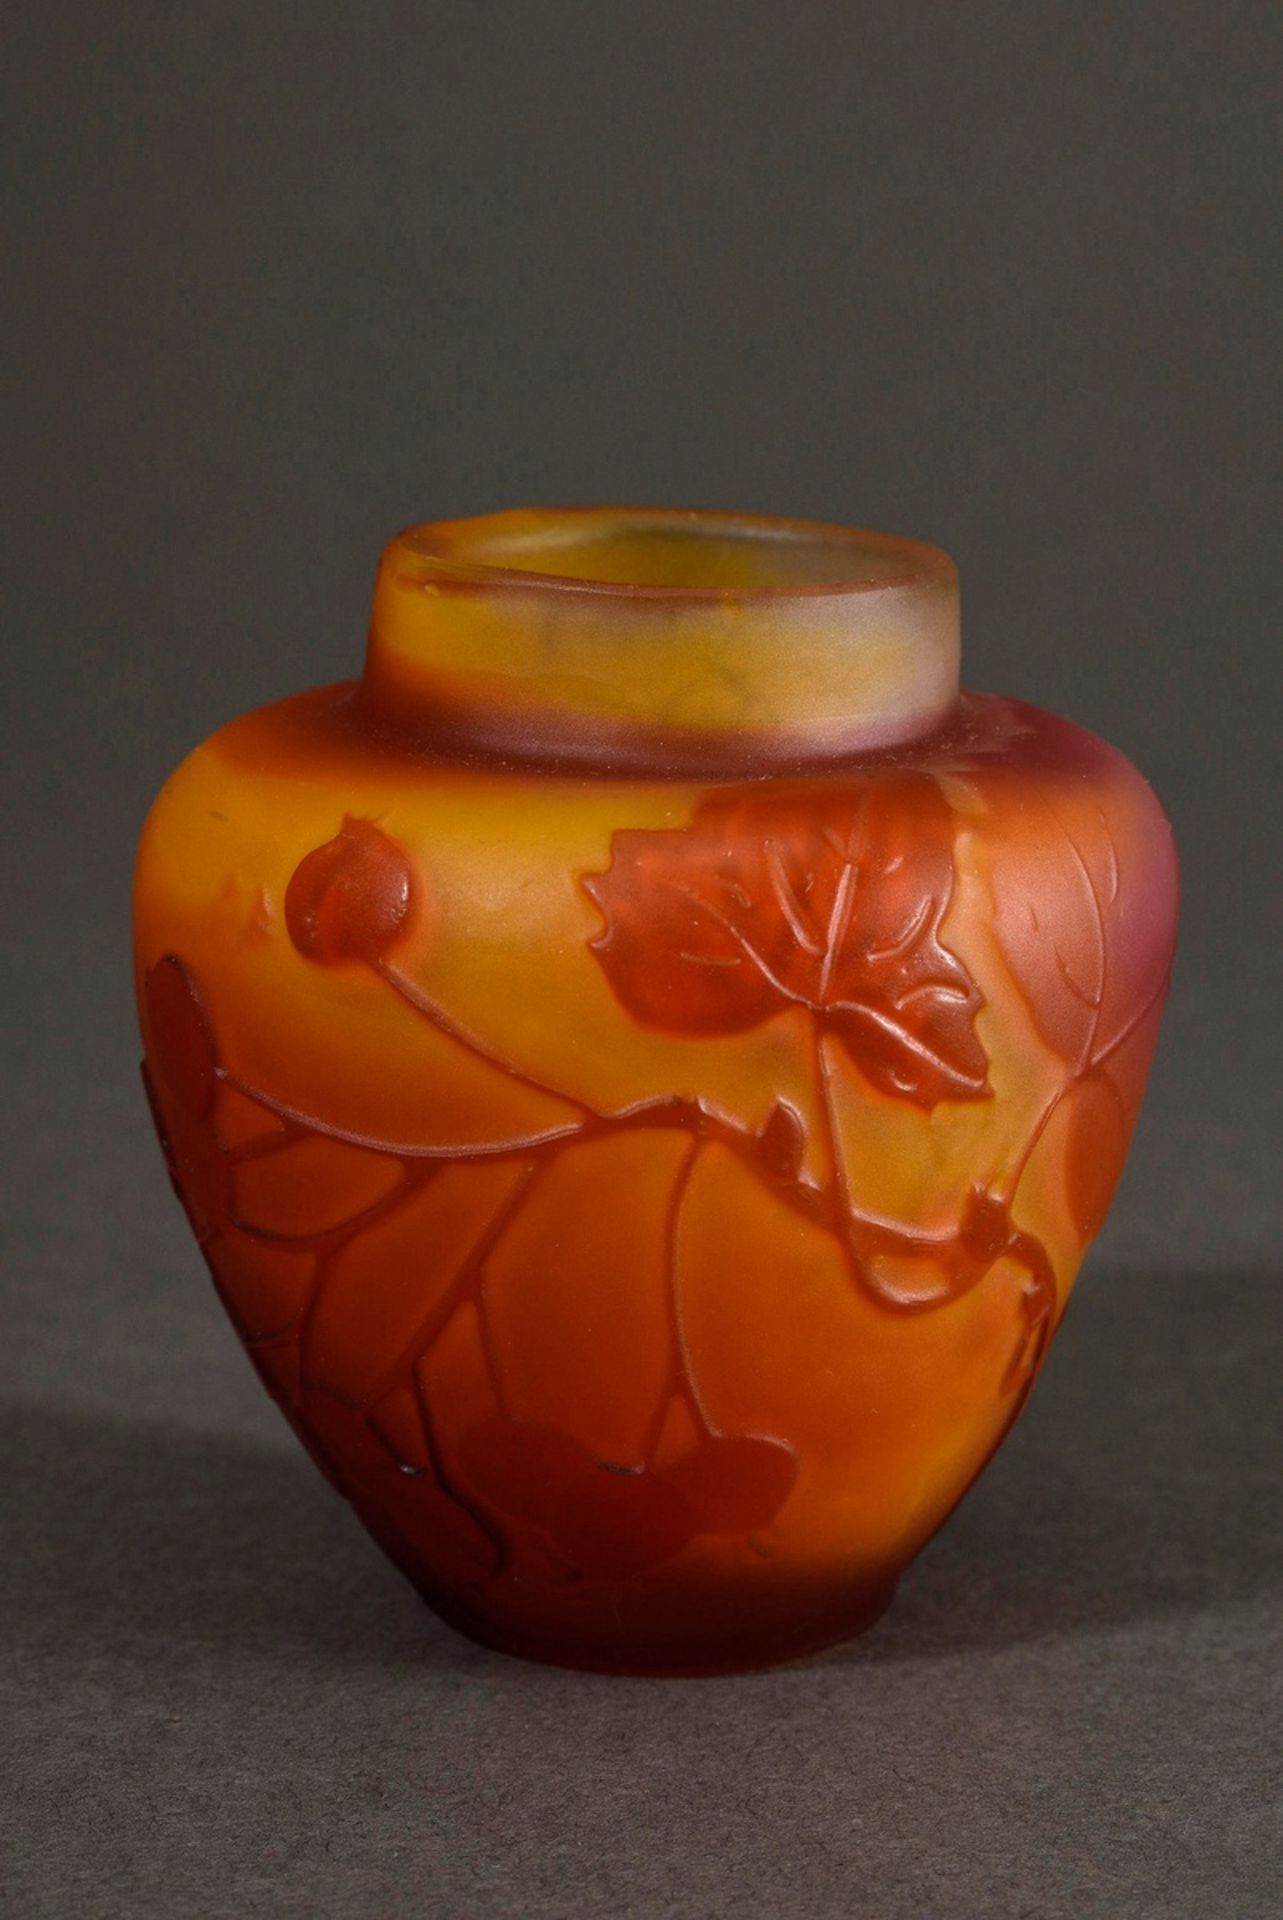 Small Gallé vase "rowan berries" in orange-red flashed glass, cut and polished, sign., 1908-1920, h - Image 3 of 6